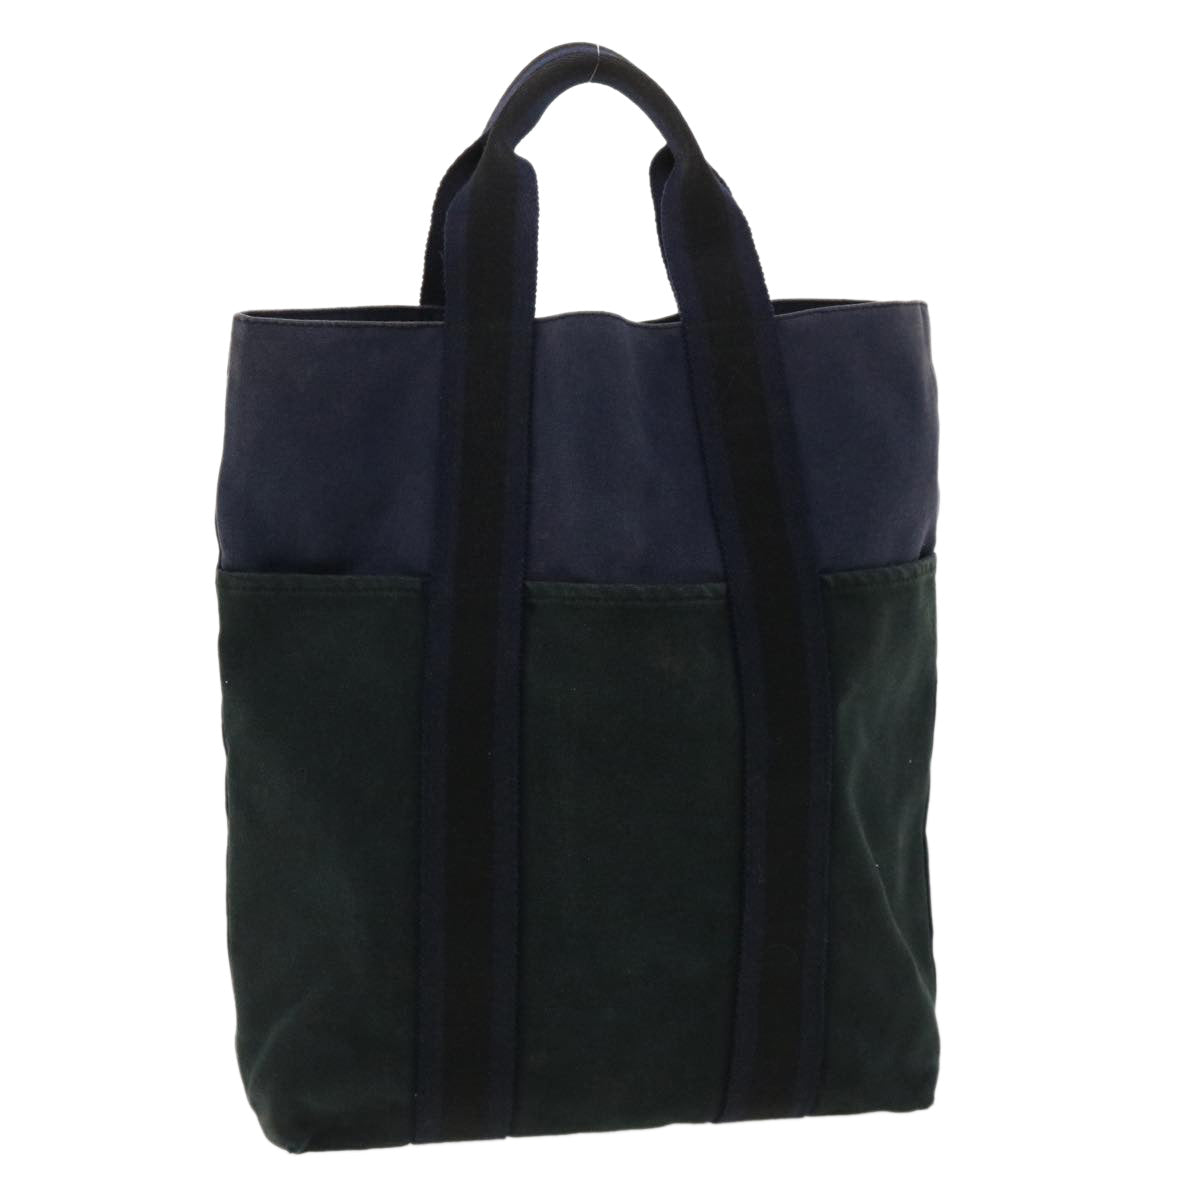 HERMES Fourre Tout Tote Bag Canvas Navy Black Green Auth 36558